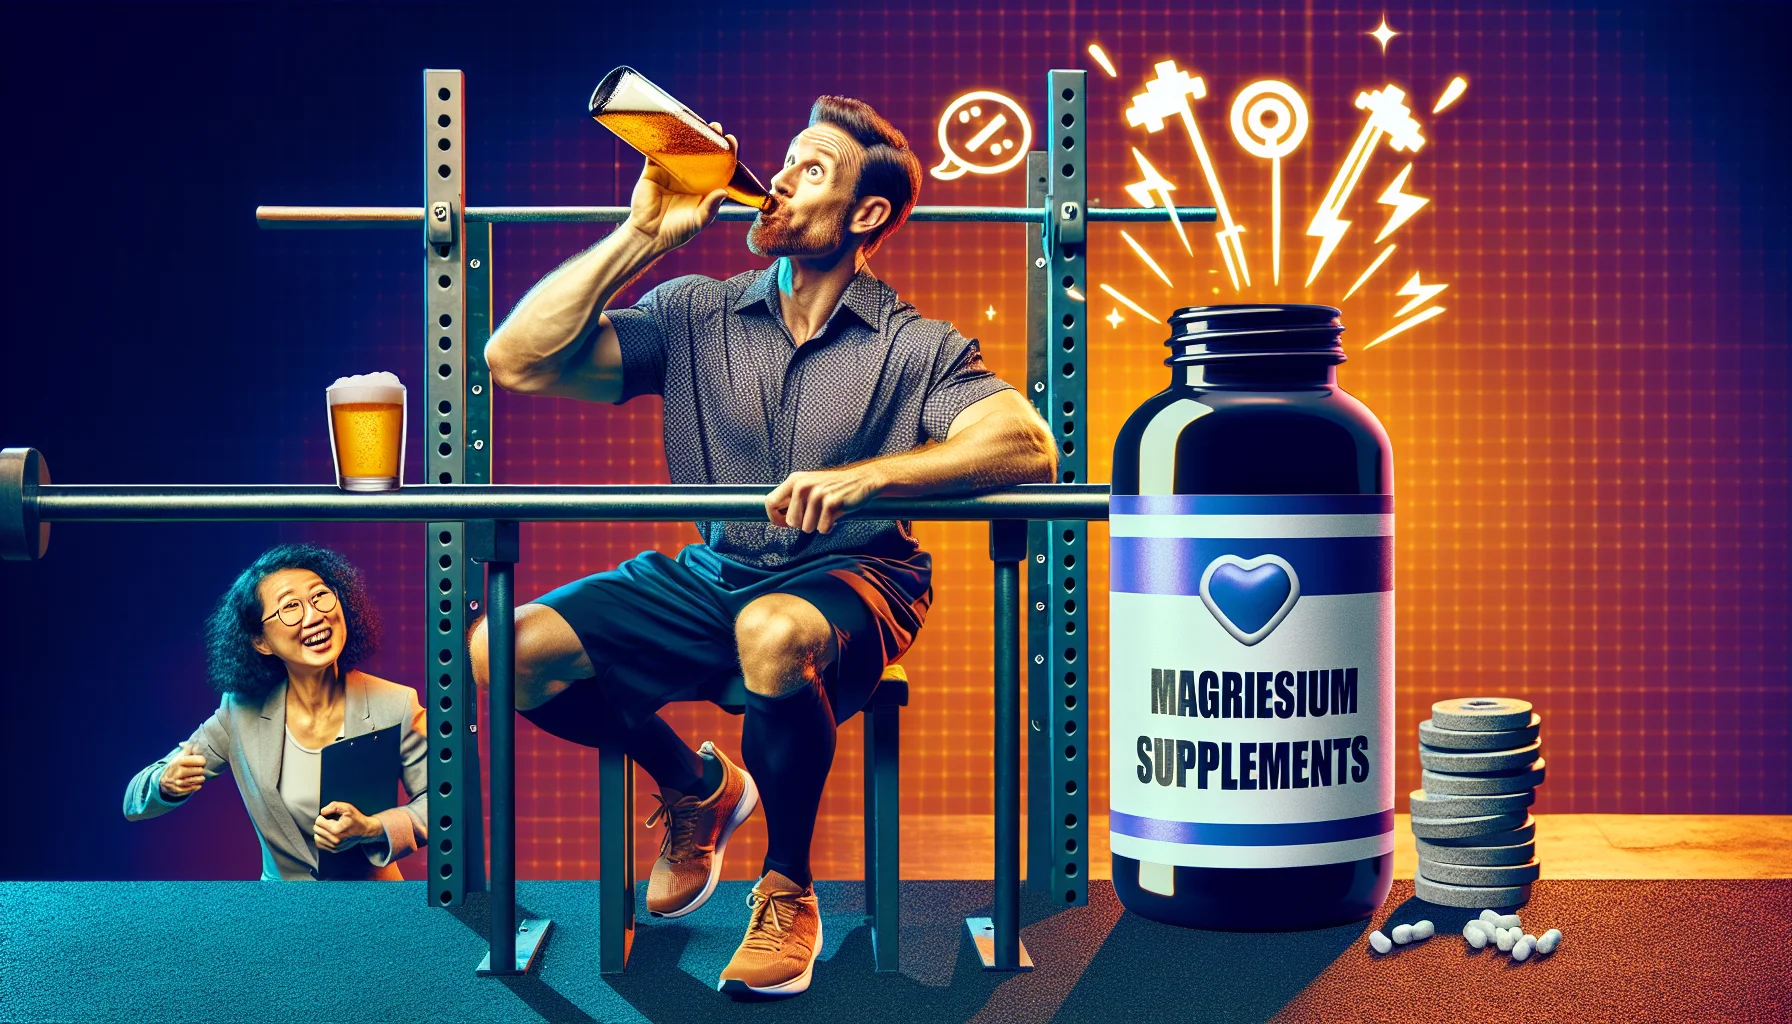 Create an amusing scenario in a sports setting showing a person consuming alcohol and then taking magnesium supplements. The person is a Caucasian male athlete in his mid-30s with a fit physique and is wearing typical gym attire. He sits at a bar designed to look like a squat rack and sips a beer, while his other hand holds a bottle of magnesium supplements. Nearby, a coach, an Asian female, seems to have a humorous reaction to the peculiar scene. For added effect, include exaggerated symbols such as 'energy boost' or 'muscle strength' coming from the magnesium bottle to make the scenario more lighthearted and amusing.